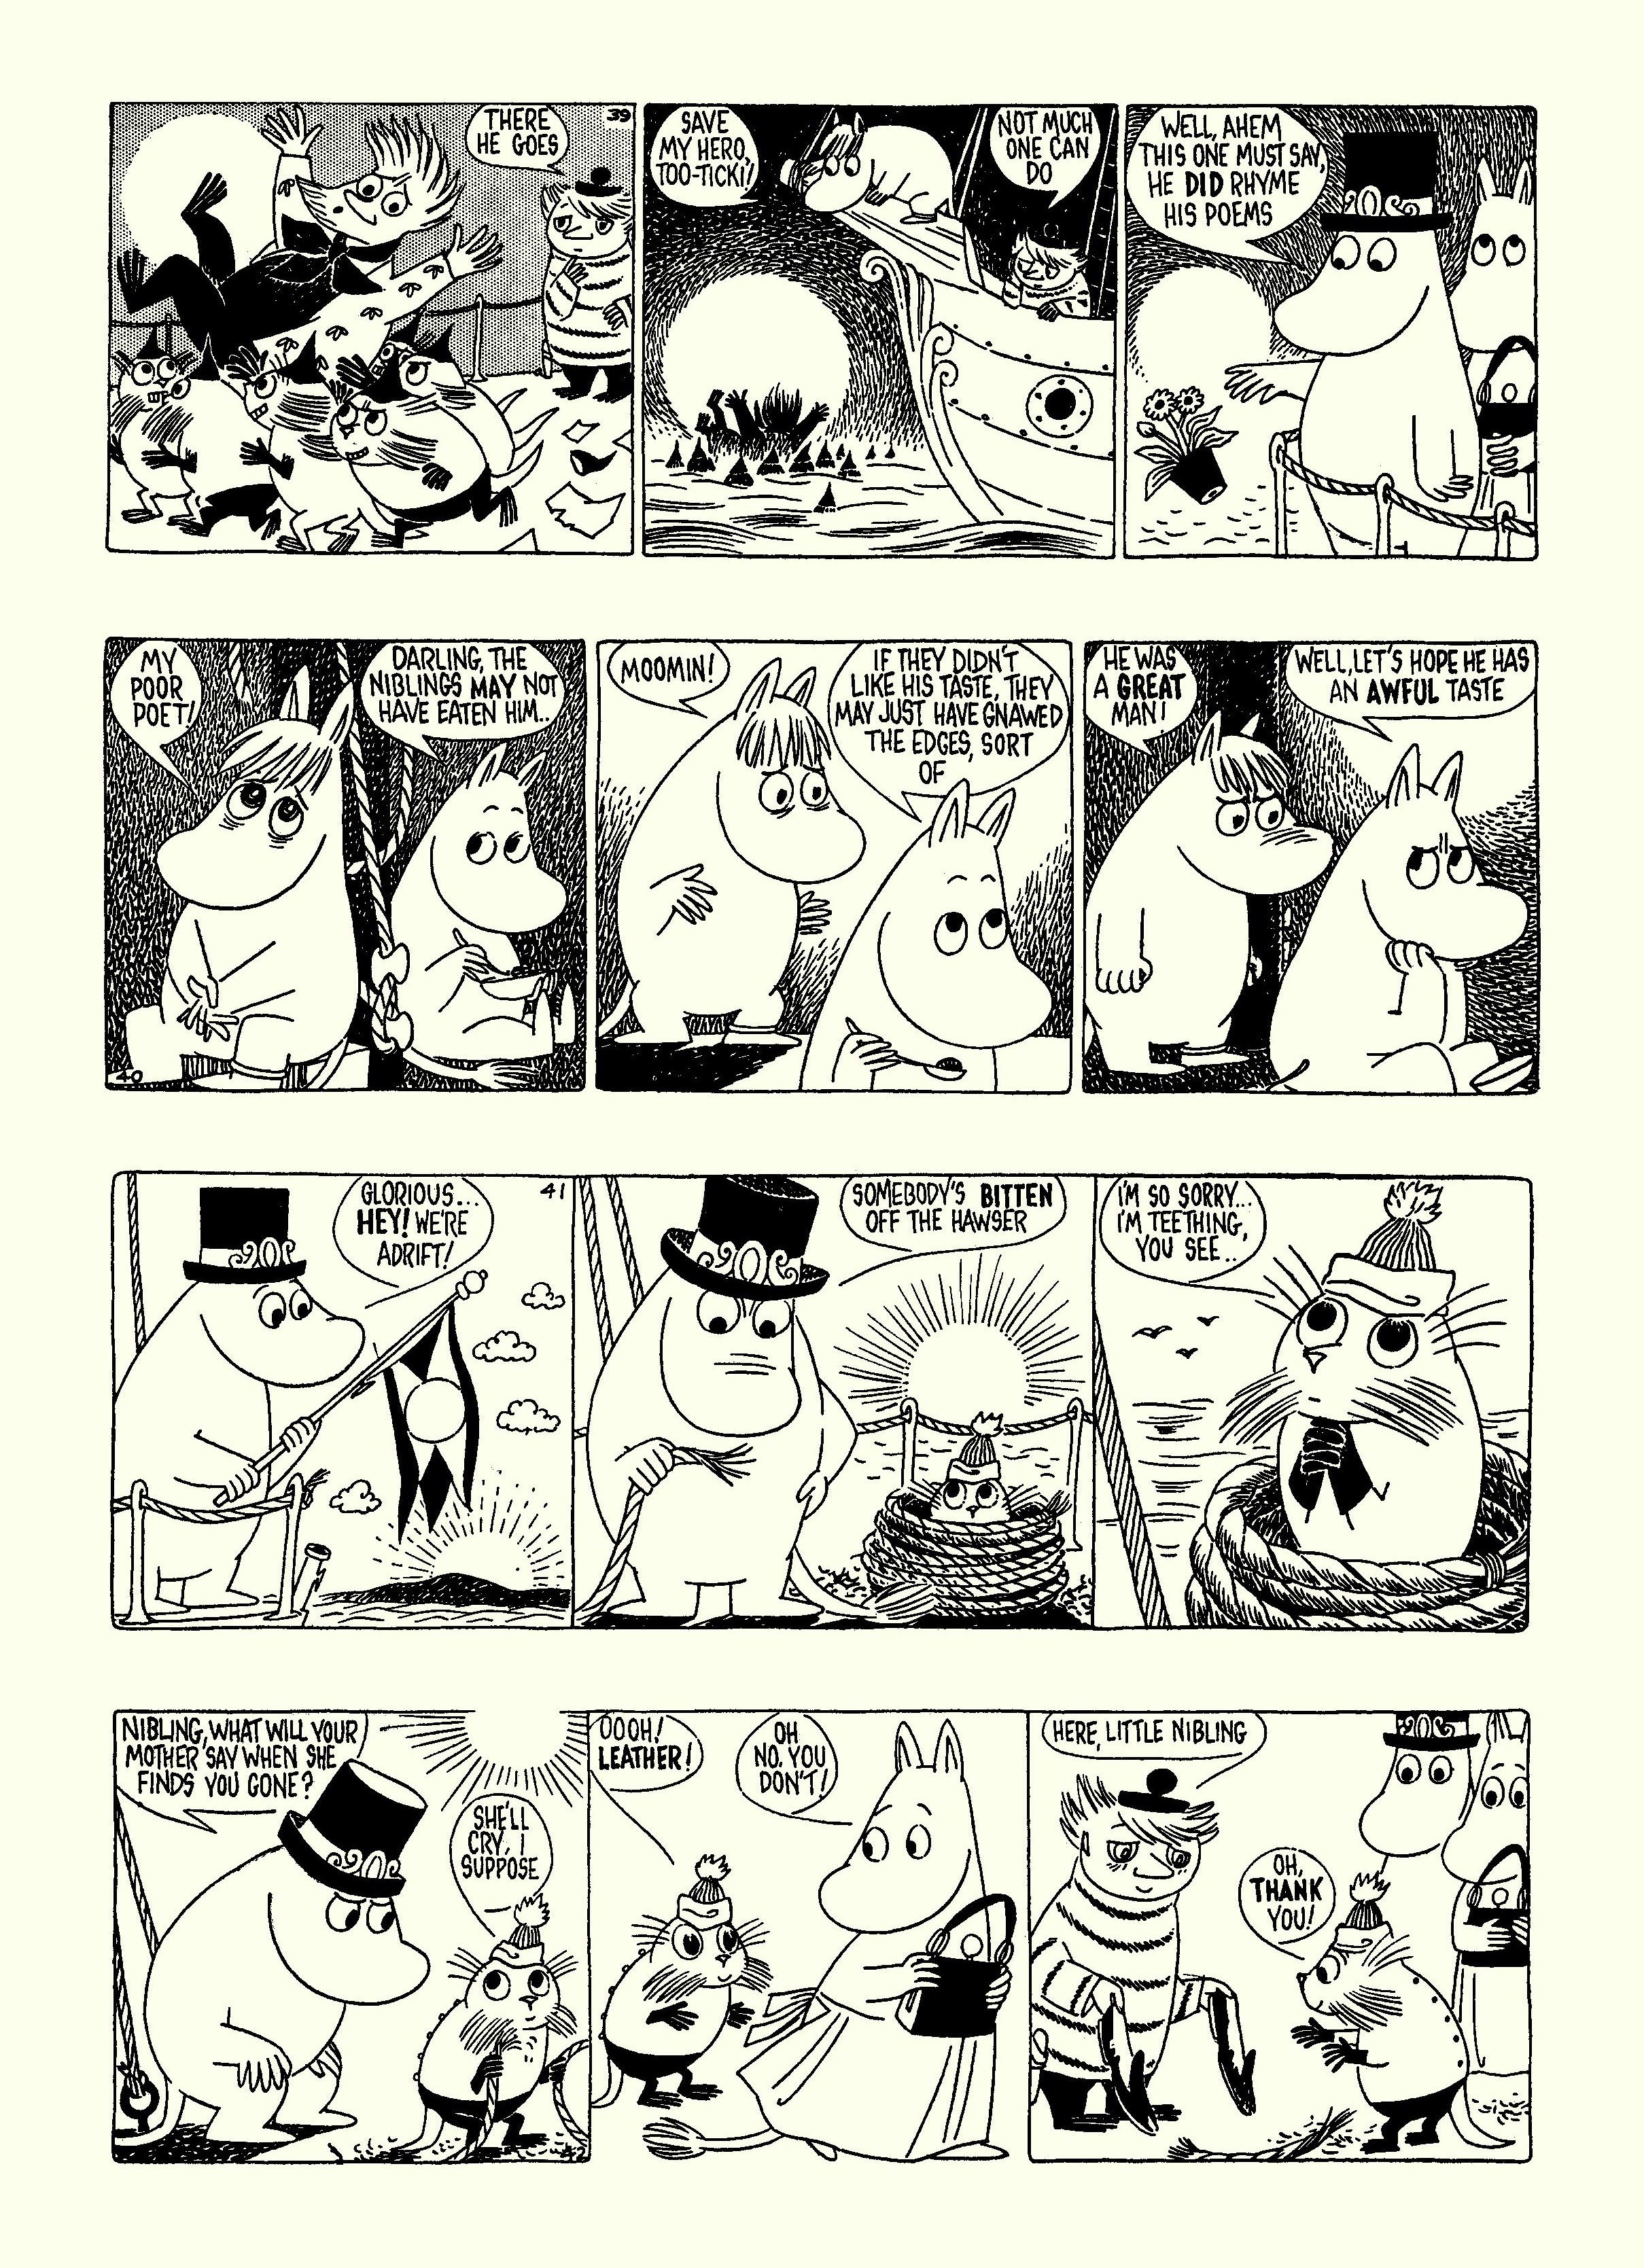 Read online Moomin: The Complete Tove Jansson Comic Strip comic -  Issue # TPB 5 - 41